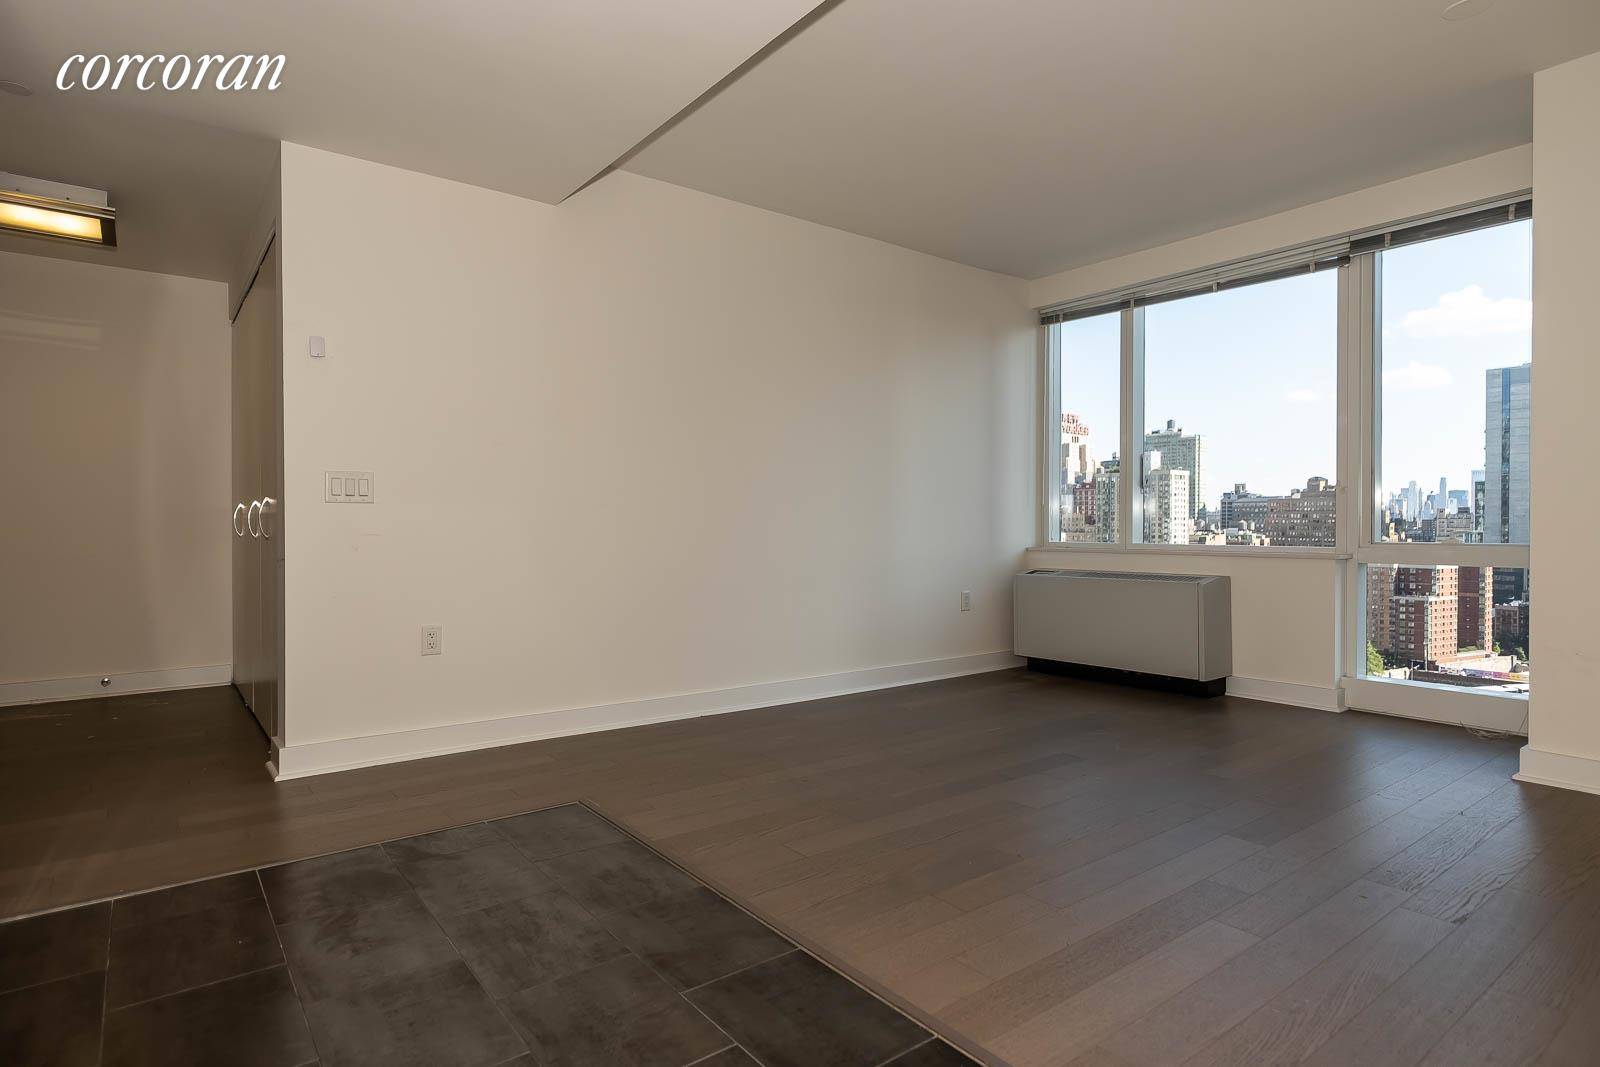 This lovely South facing 22nd floor apartment has an abundance of views and light.